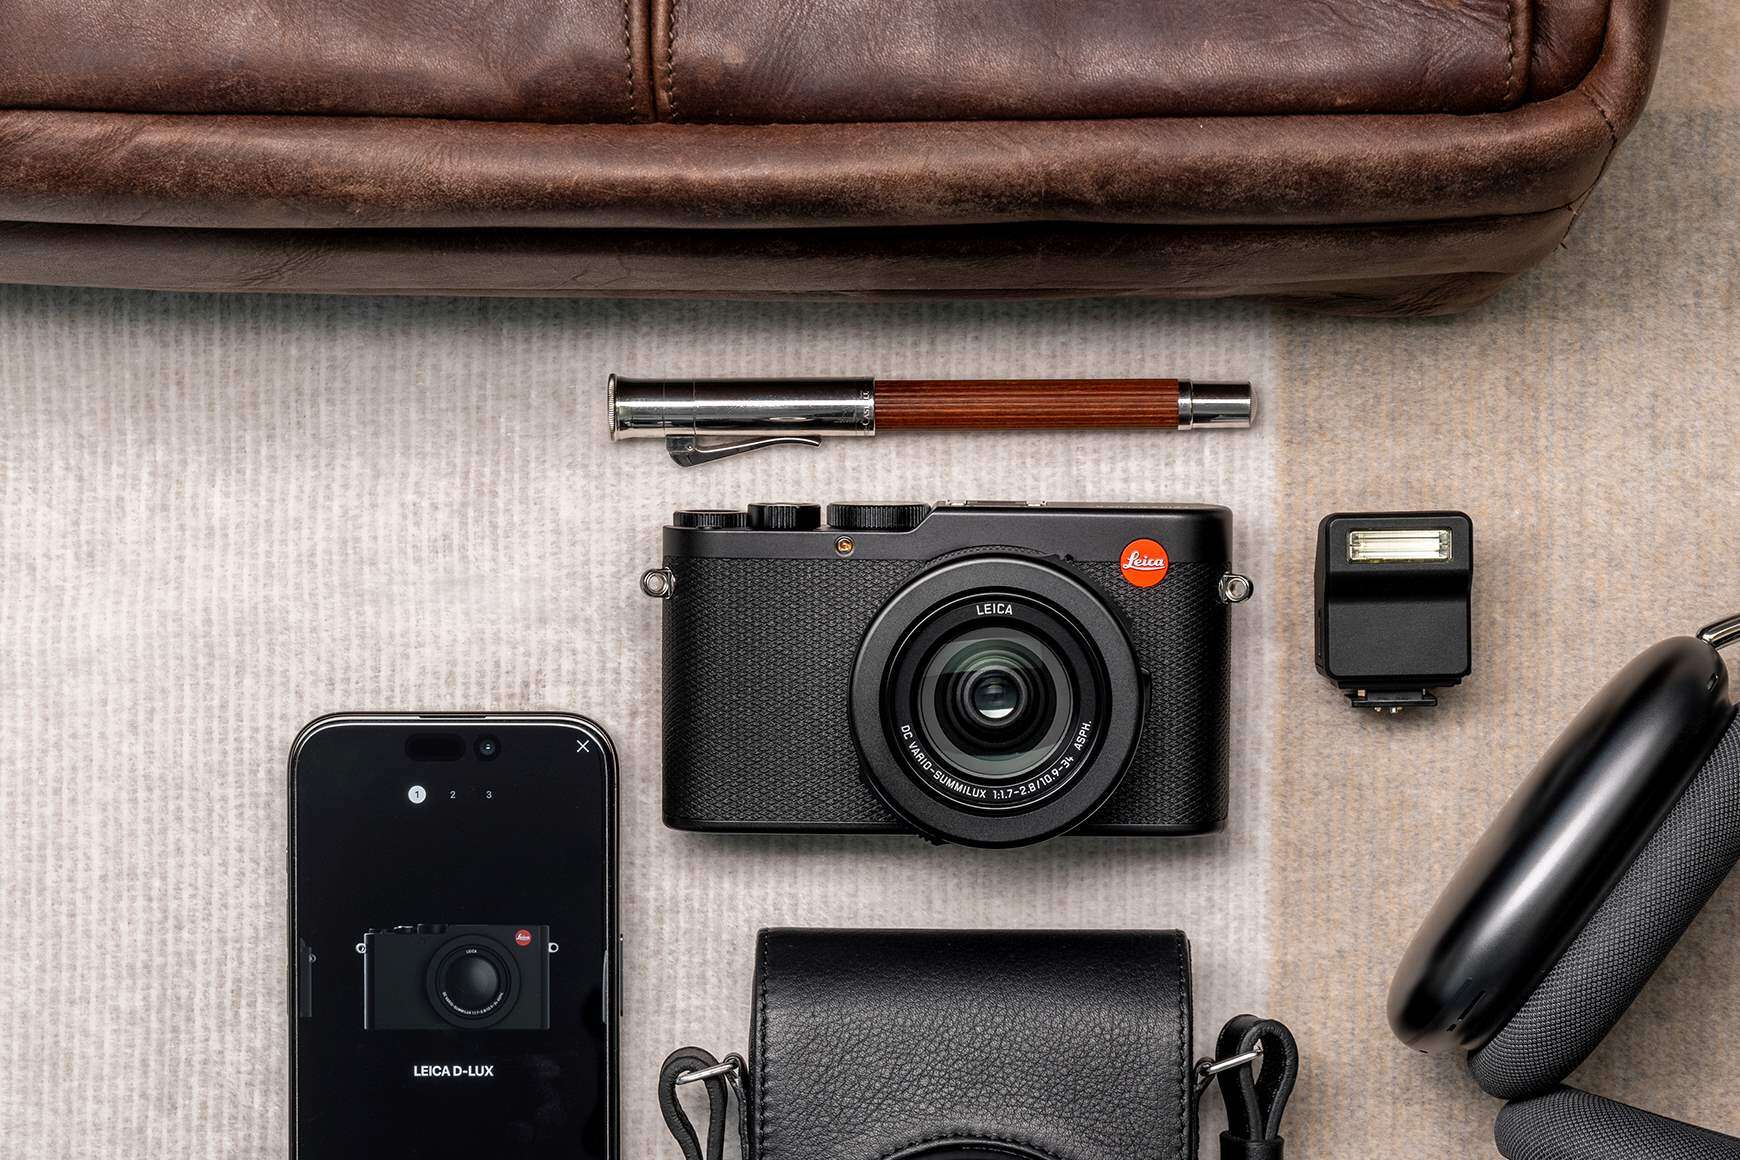 Leica Unveils Refreshed Compact Camera: the Leica D-Lux 8